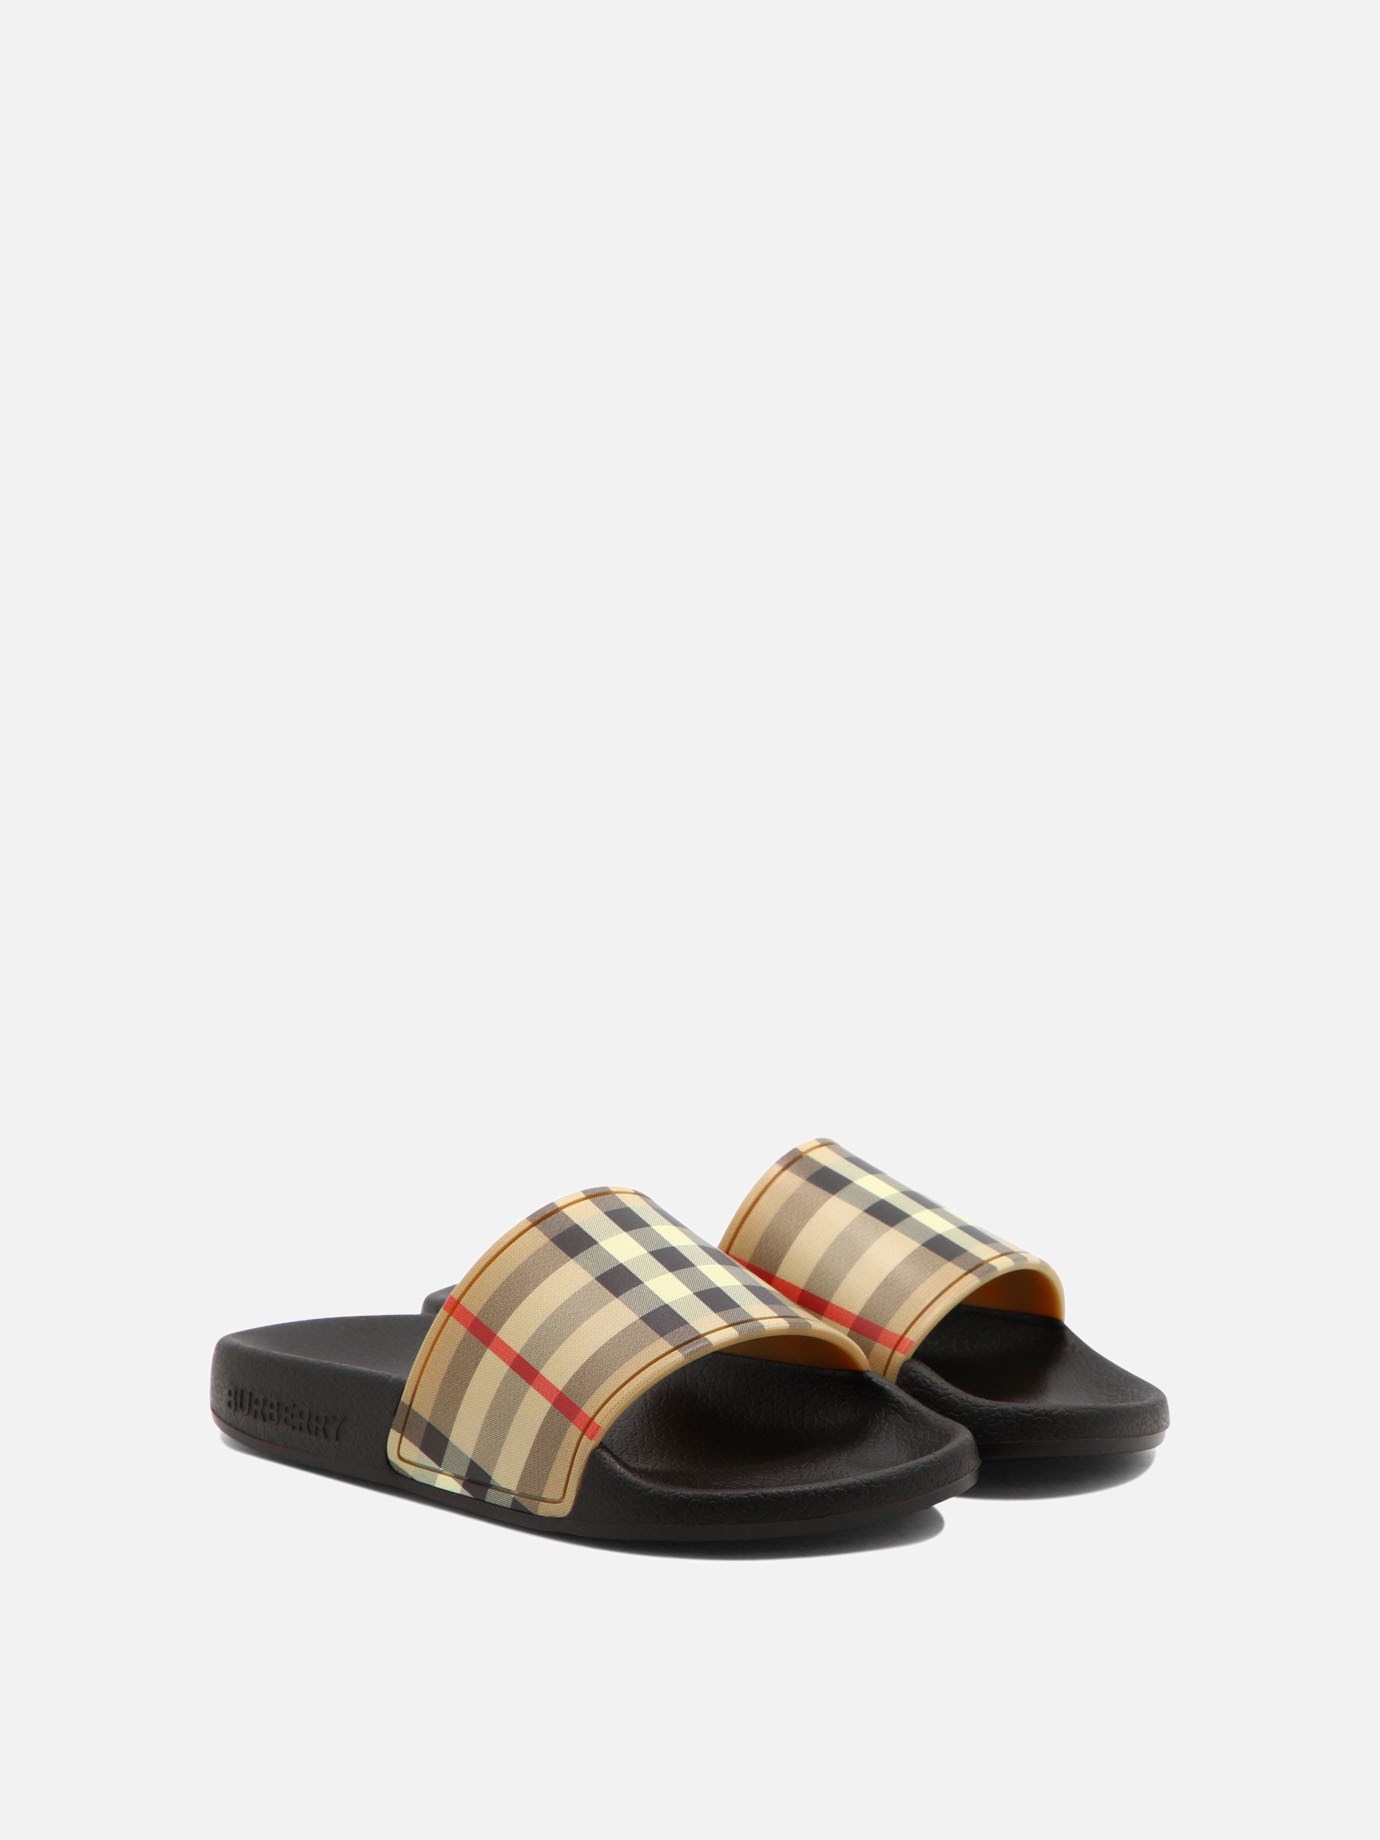  Vintage Check  sandals by Burberry Kids